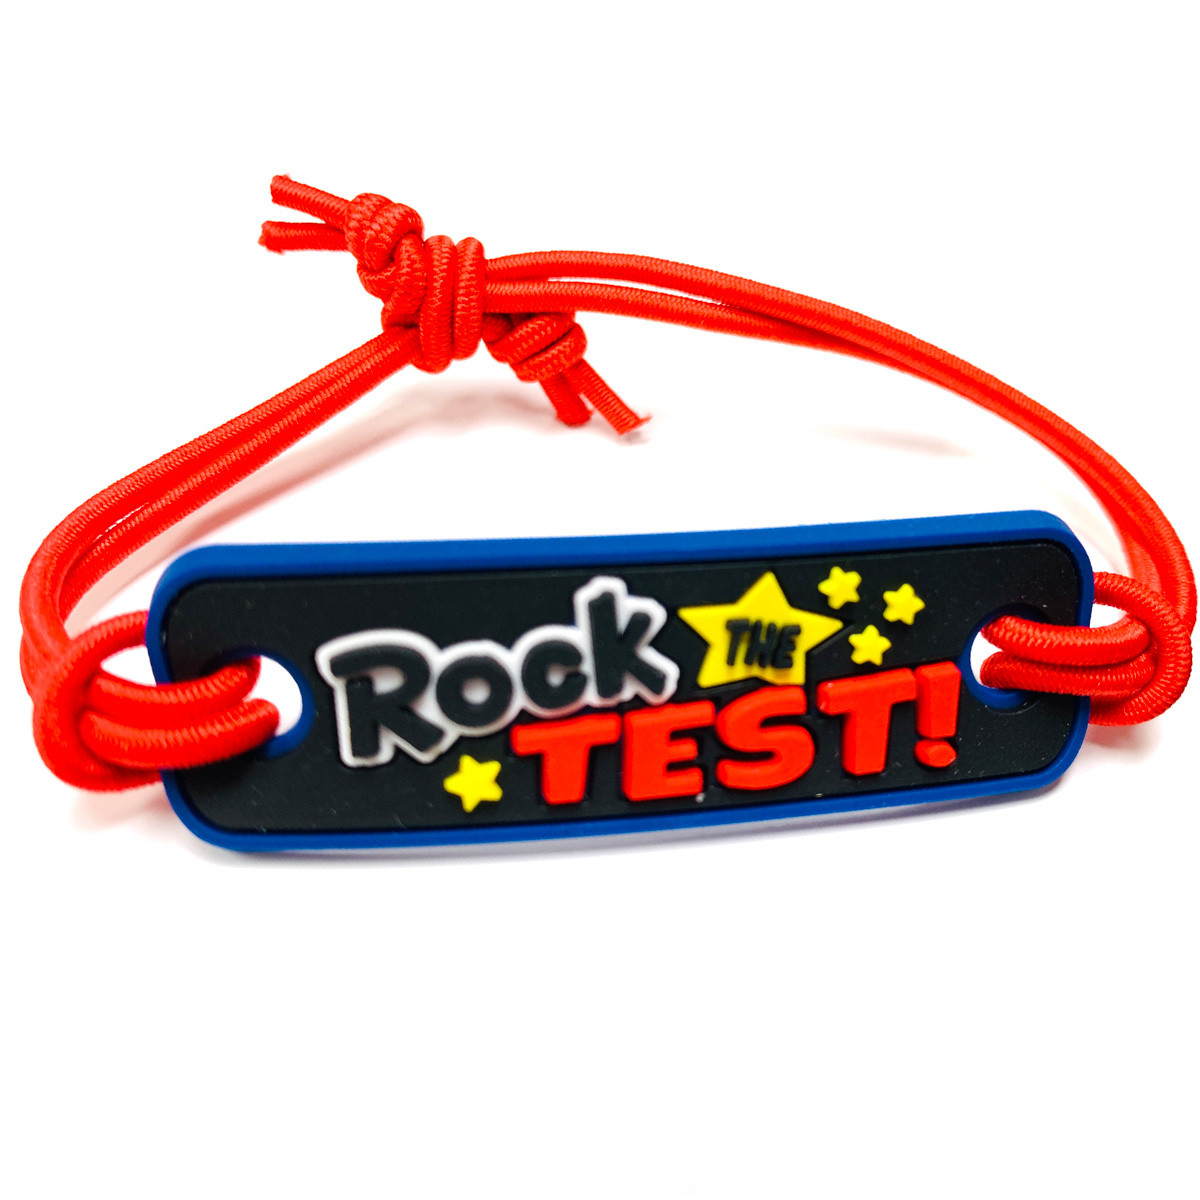 3D Bands - Rock The Test!